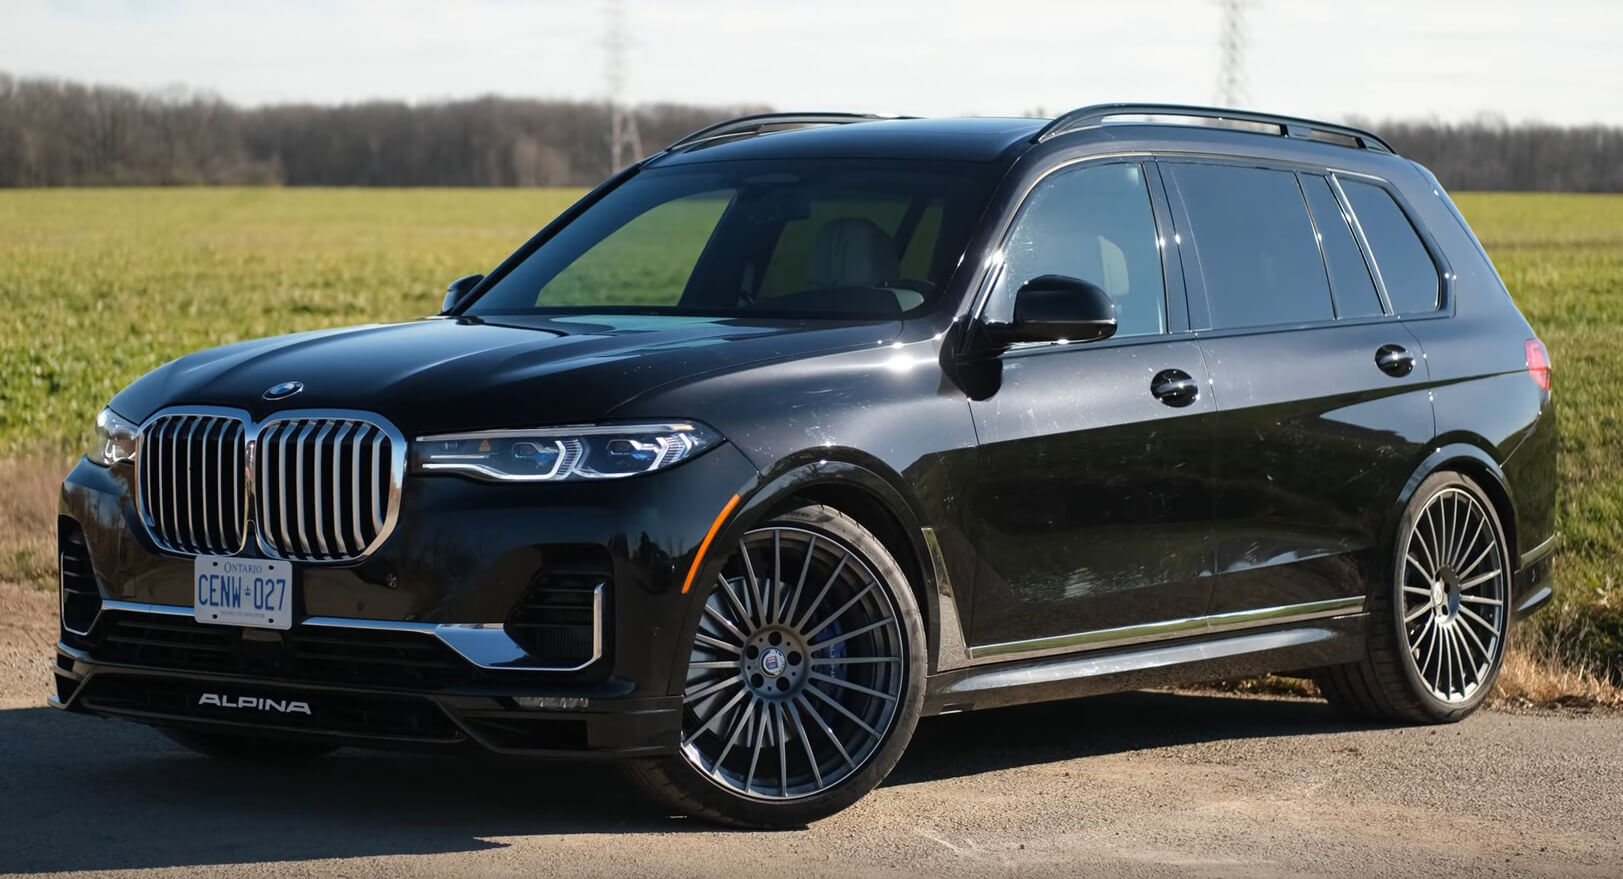 Does The World Want The 612 HP Alpina XB7 Tremendous SUV? Spoiler Alert: Hell Yeah! Auto Recent